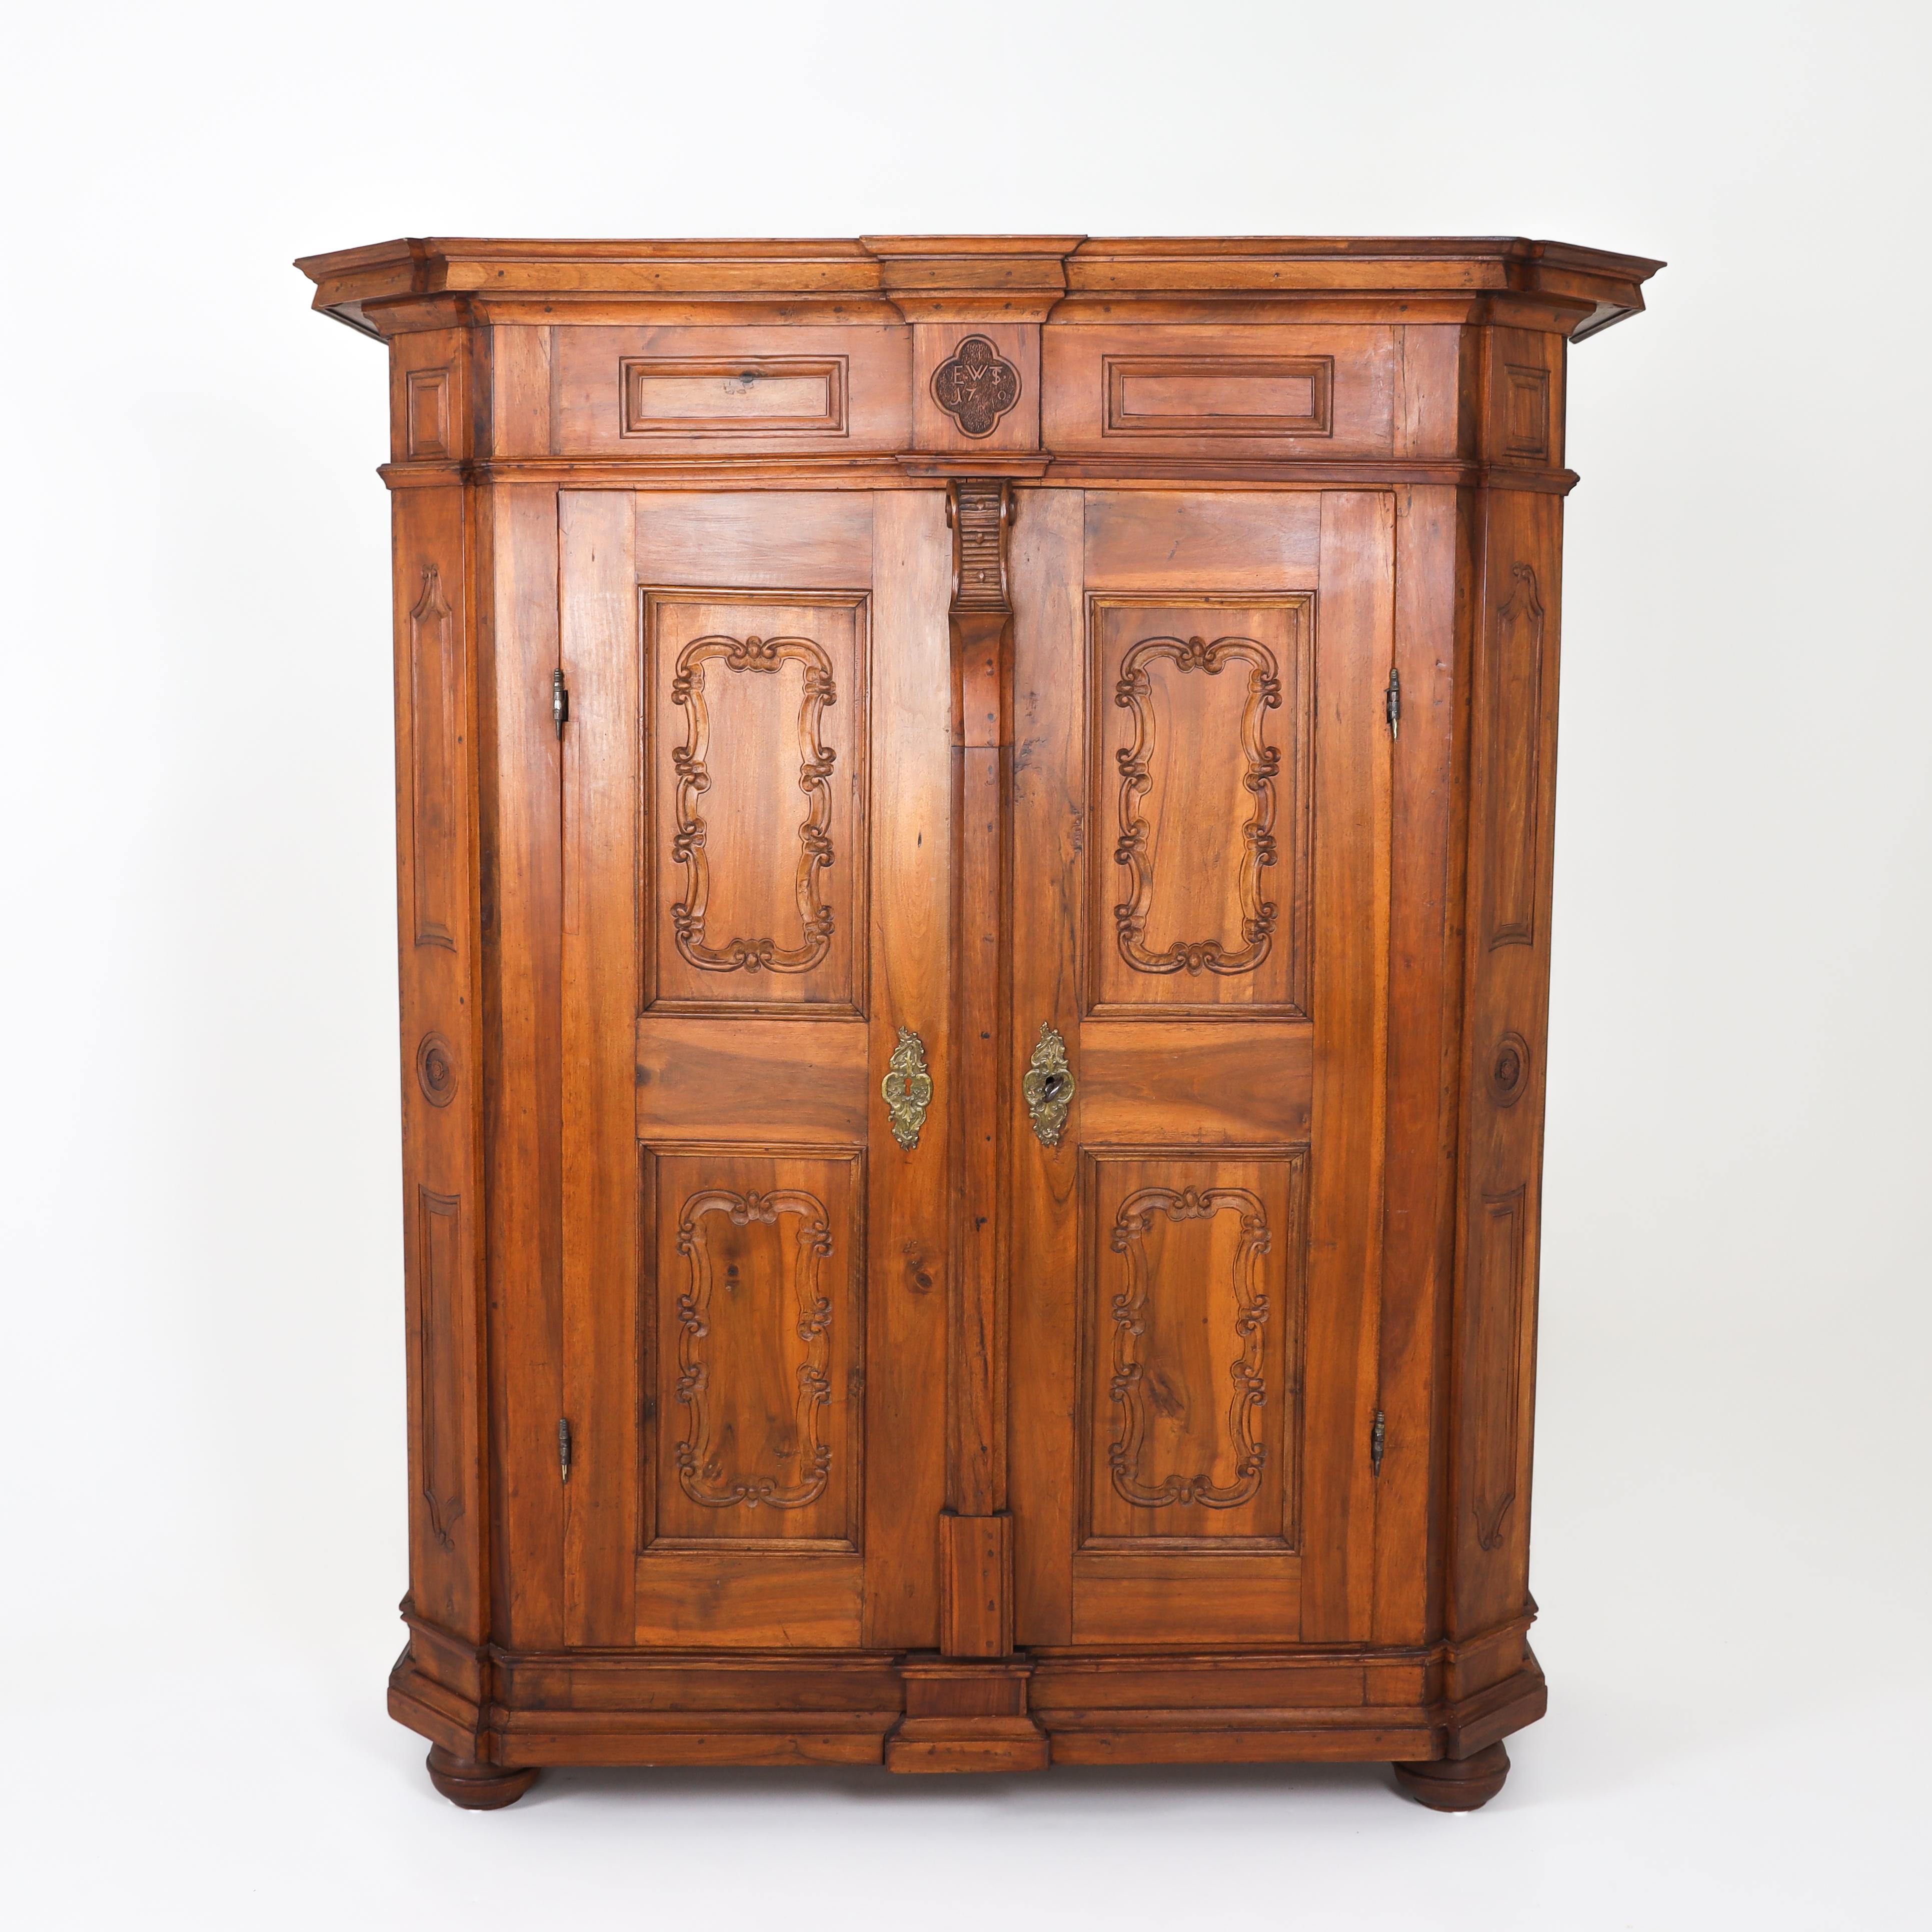 Two-door baroque cabinet with profiled plinth and cornice as well as coffering on all sides. The pilasters are bevelled. A quatrefoil cartouche with monogram EWTS and rubbed date (17#0) rises centrally above a pronounced volute. Very beautiful iron